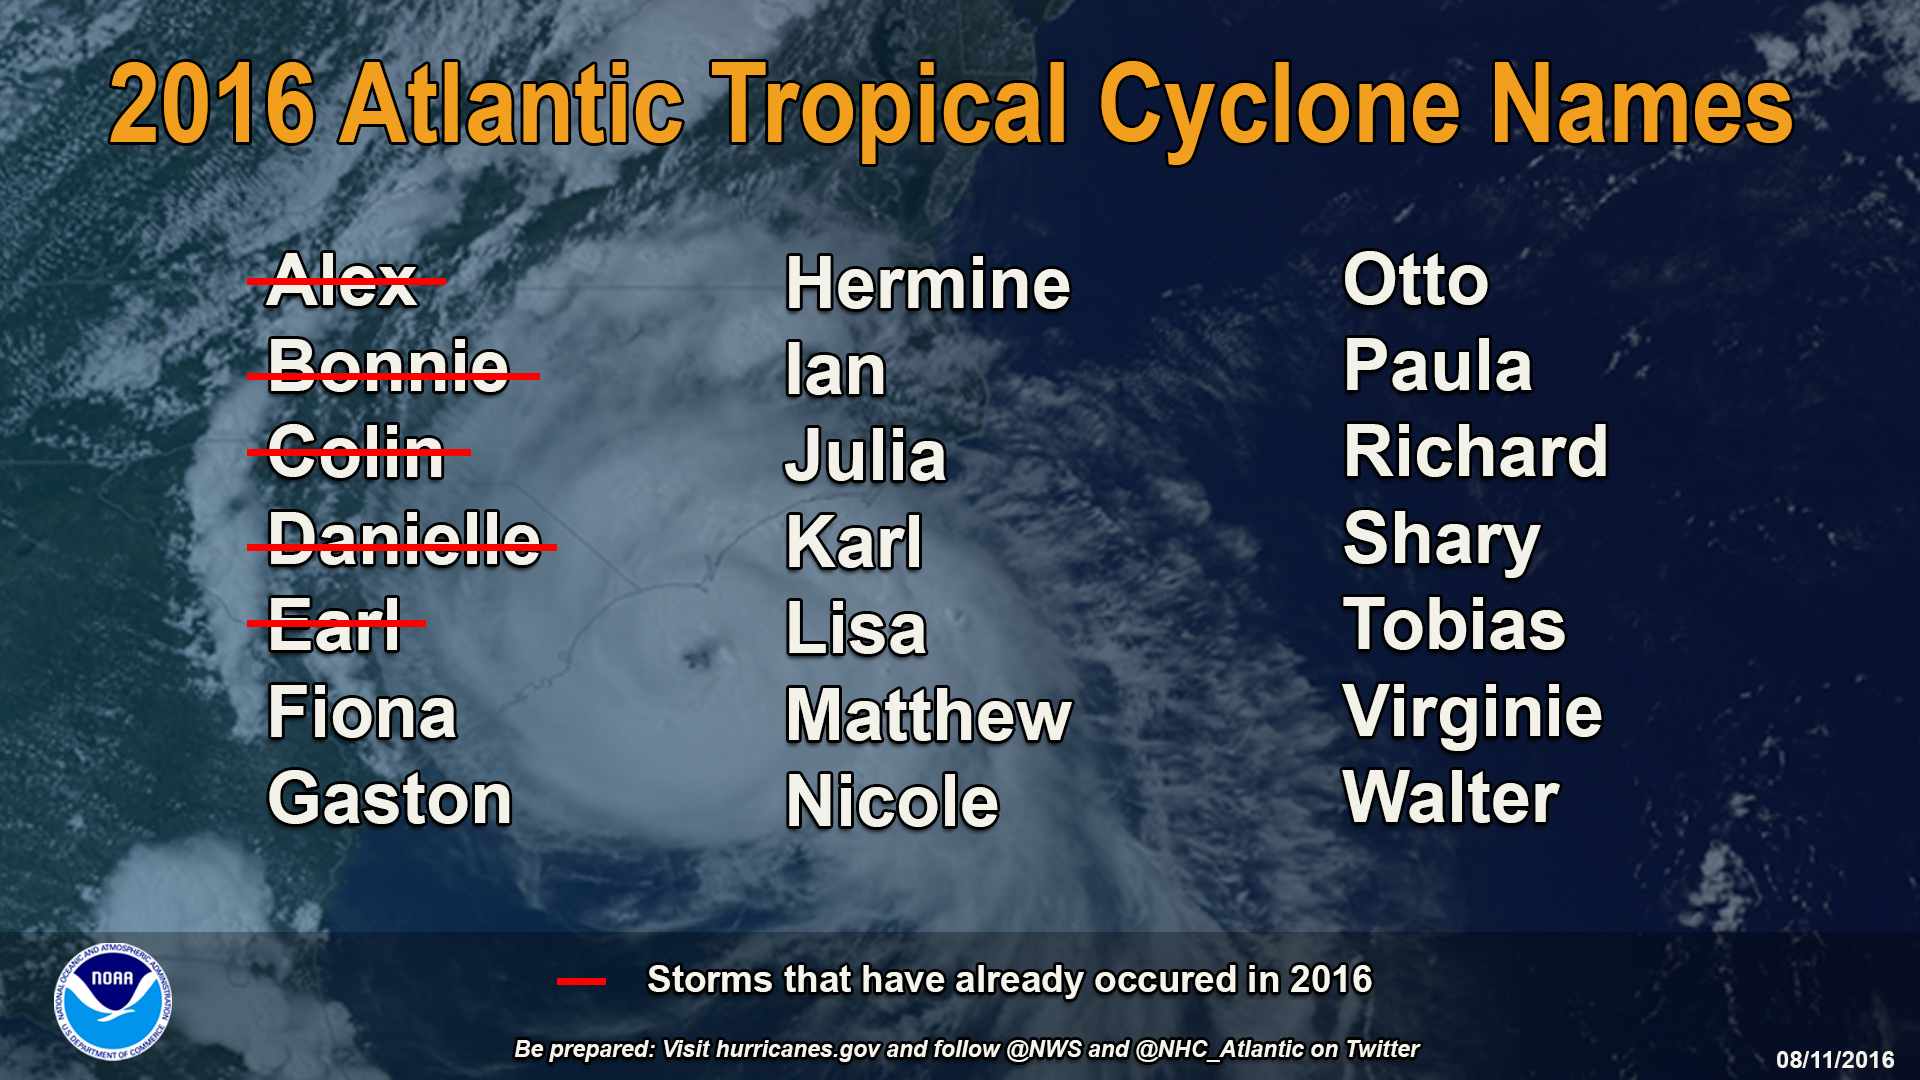 As of August 11, there have been five named storms in 2016, including two hurricanes (Alex and Earl). Four made landfall: Bonnie (in South Carolina), Colin (in western Florida), Danielle (in eastern Mexico), and Earl (in Belize and Mexico).